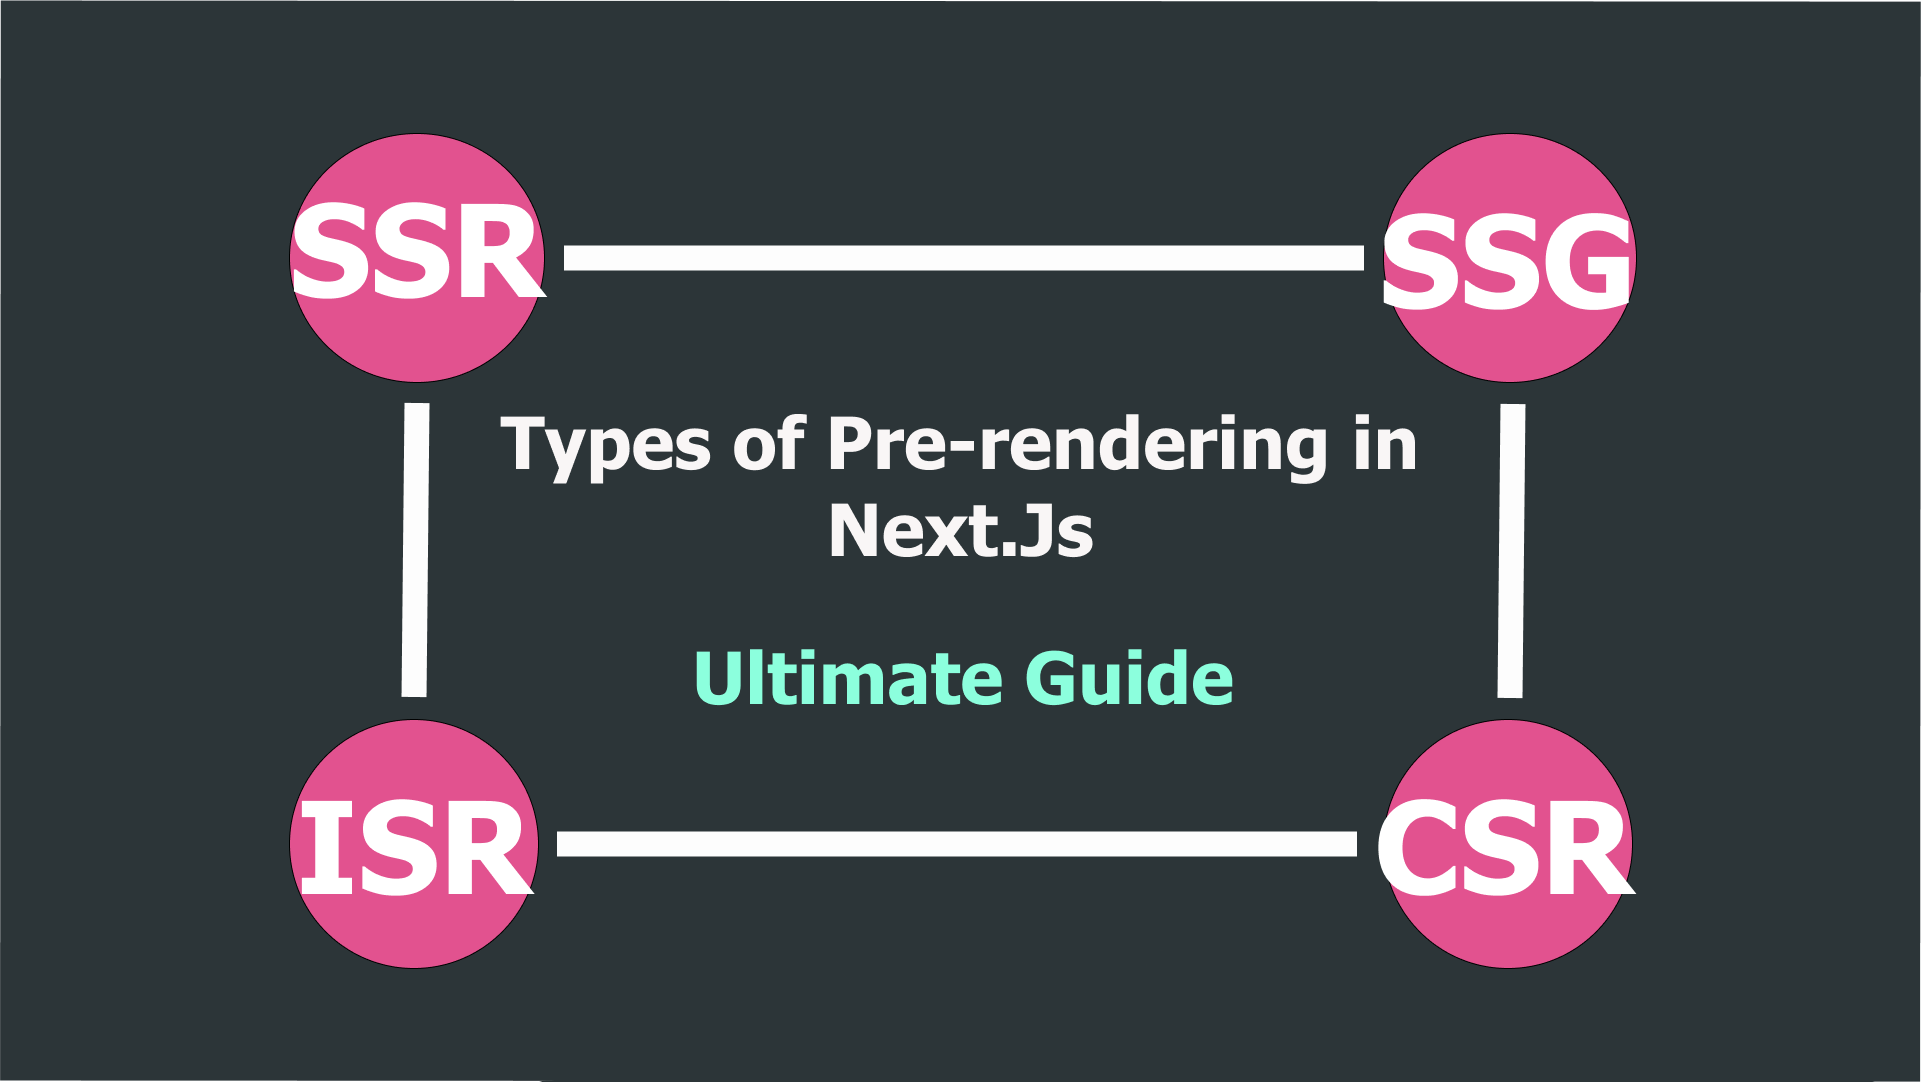 SSR - SSG - ISR - CSR in Next.js - The Ultimate Guide